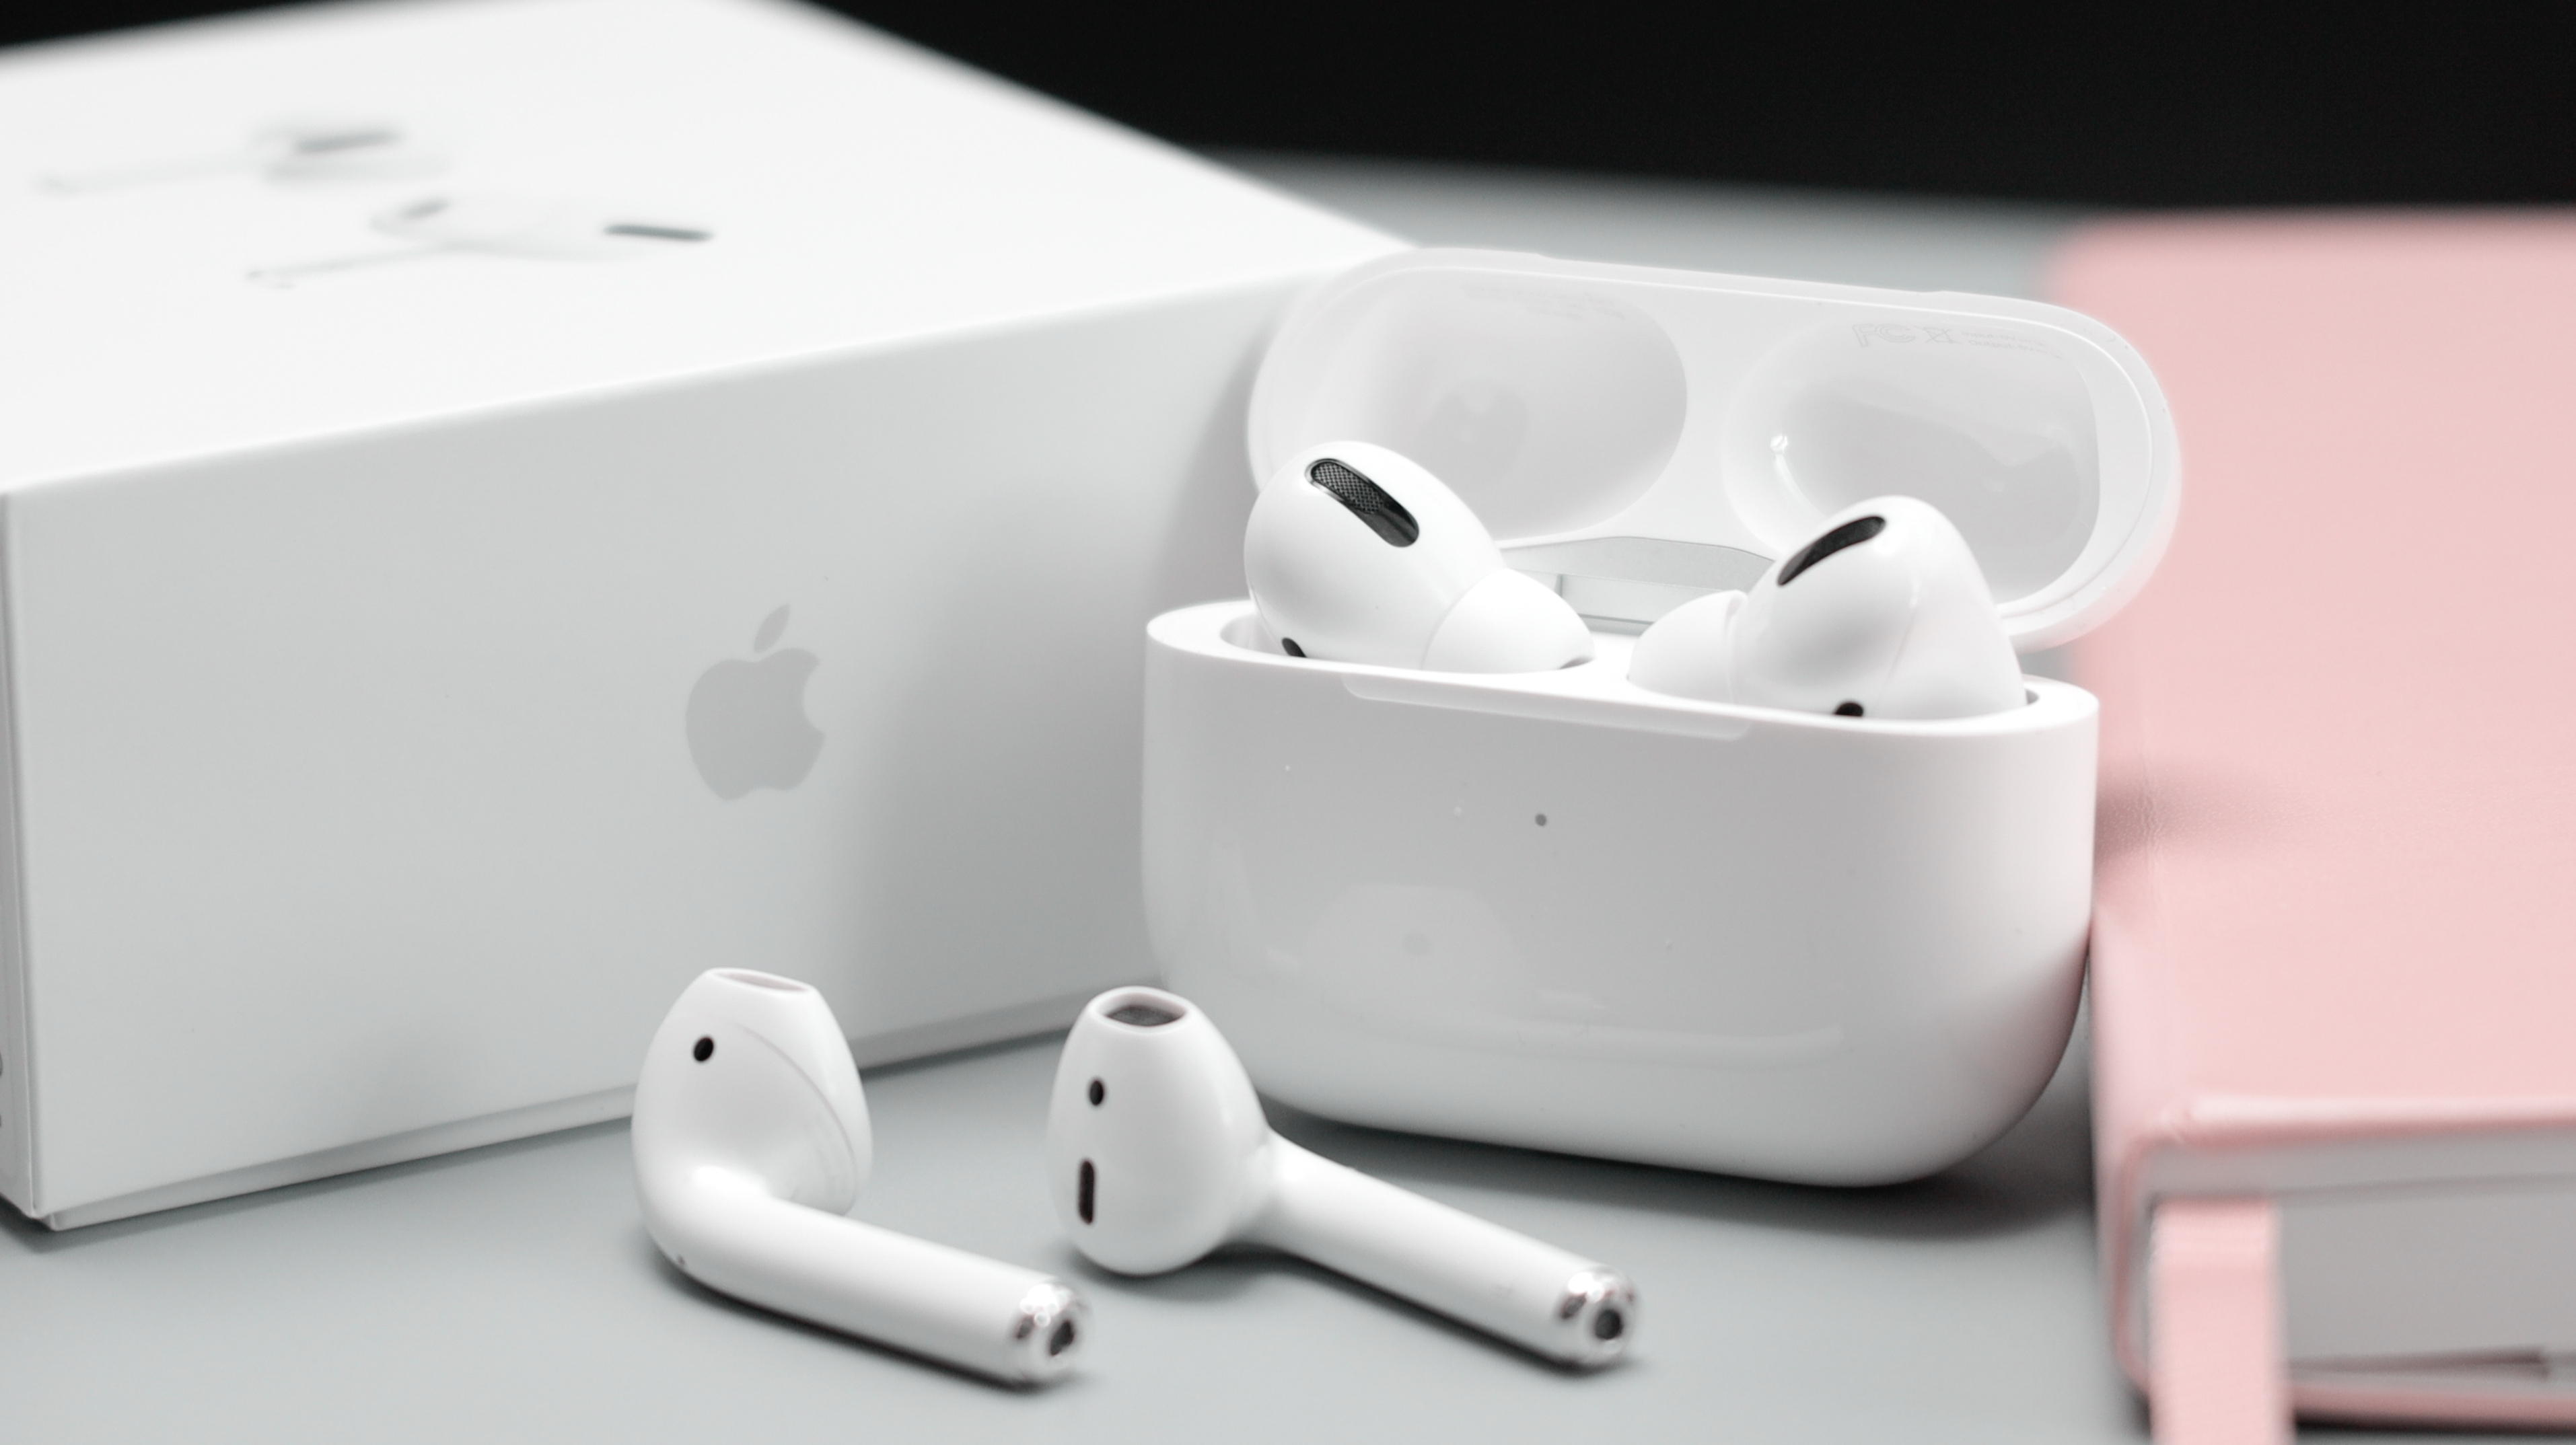 Airpods space. Apple AIRPODS 2. Эппл аирподс 3. Apple AIRPODS Pro 2. Apple AIRPODS Pro 3.